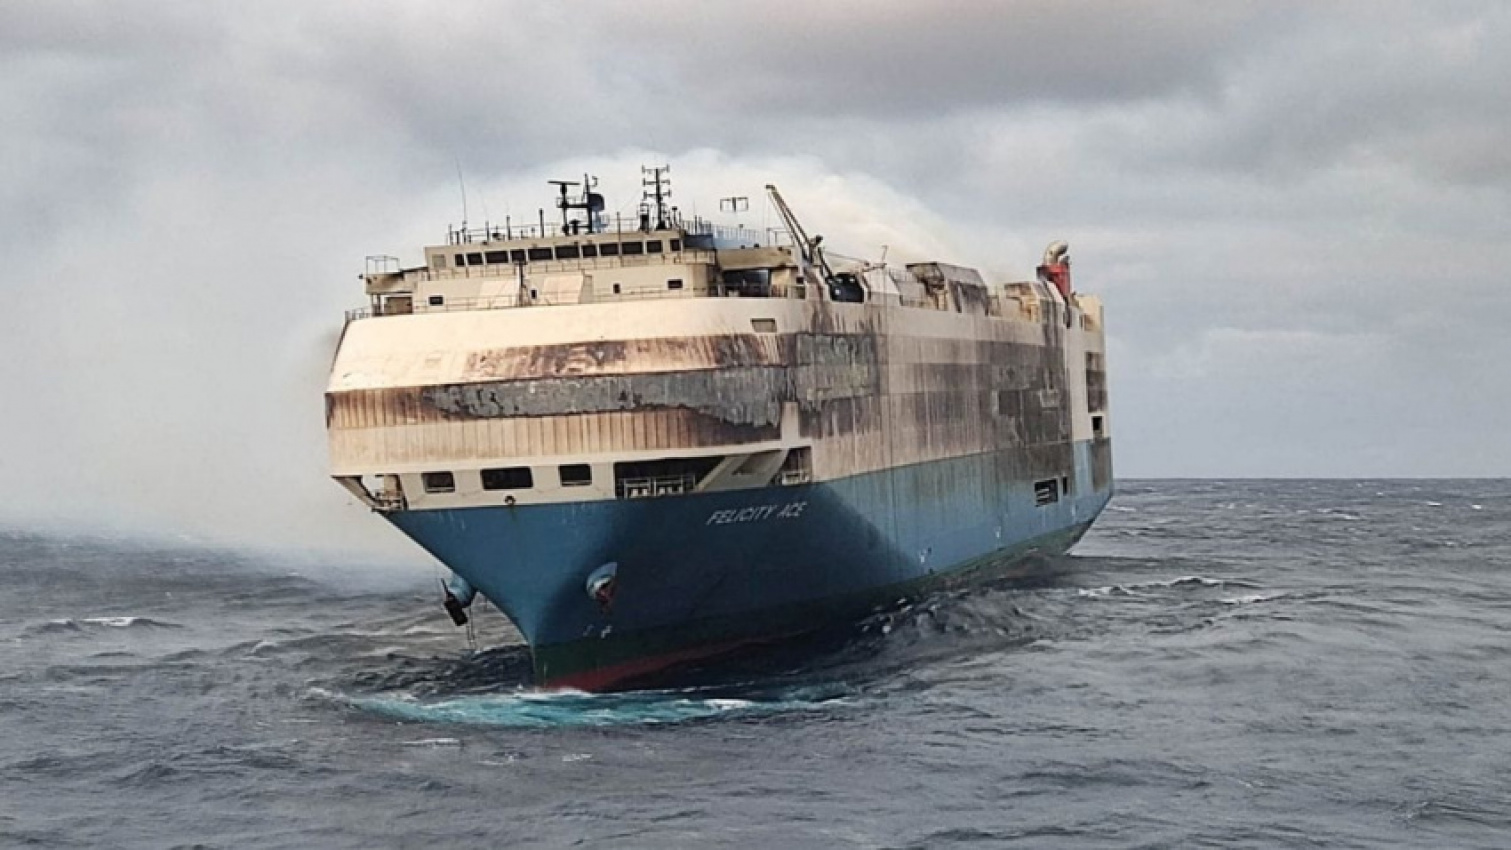 autos, cars, auto news, carandbike, felicity ace, felicity ace cargo ship, felicity ace cargo ship news, felicity ace ship fire, mitsui o.s.k. lines ltd, news, salvage team boards burnt ship with luxury cars off azores, towing begins